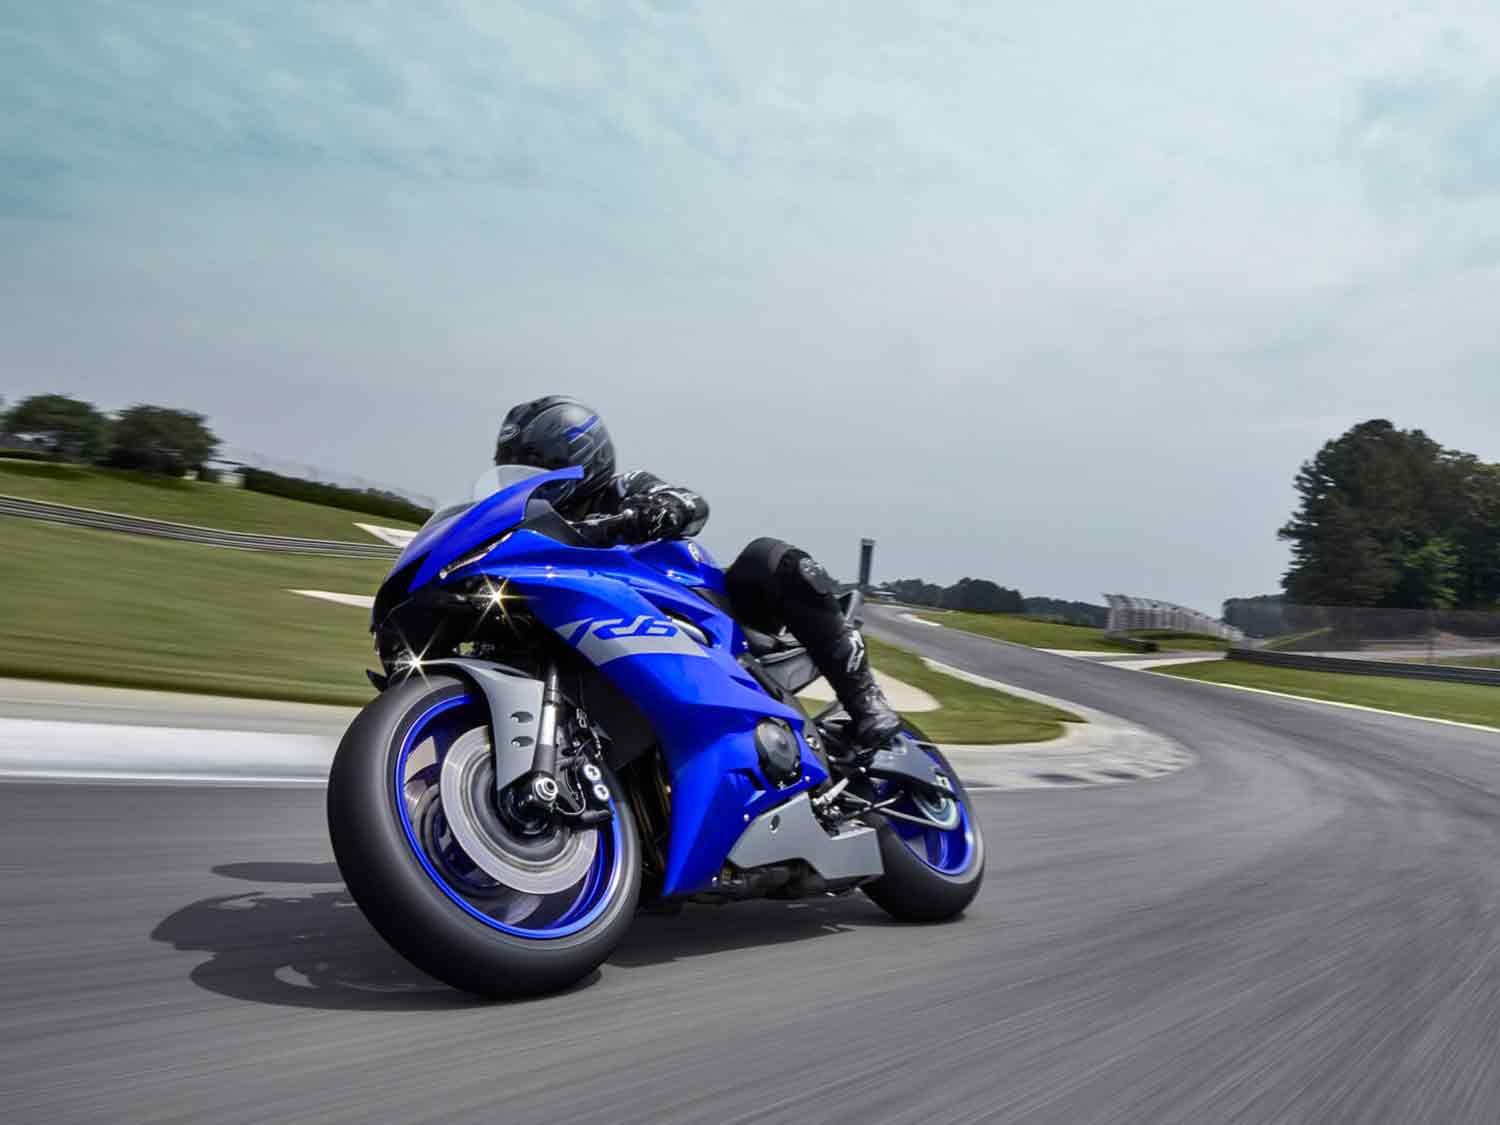 2021 Yamaha YZF-R6 Race First Look Preview Photo Gallery - News AKMI